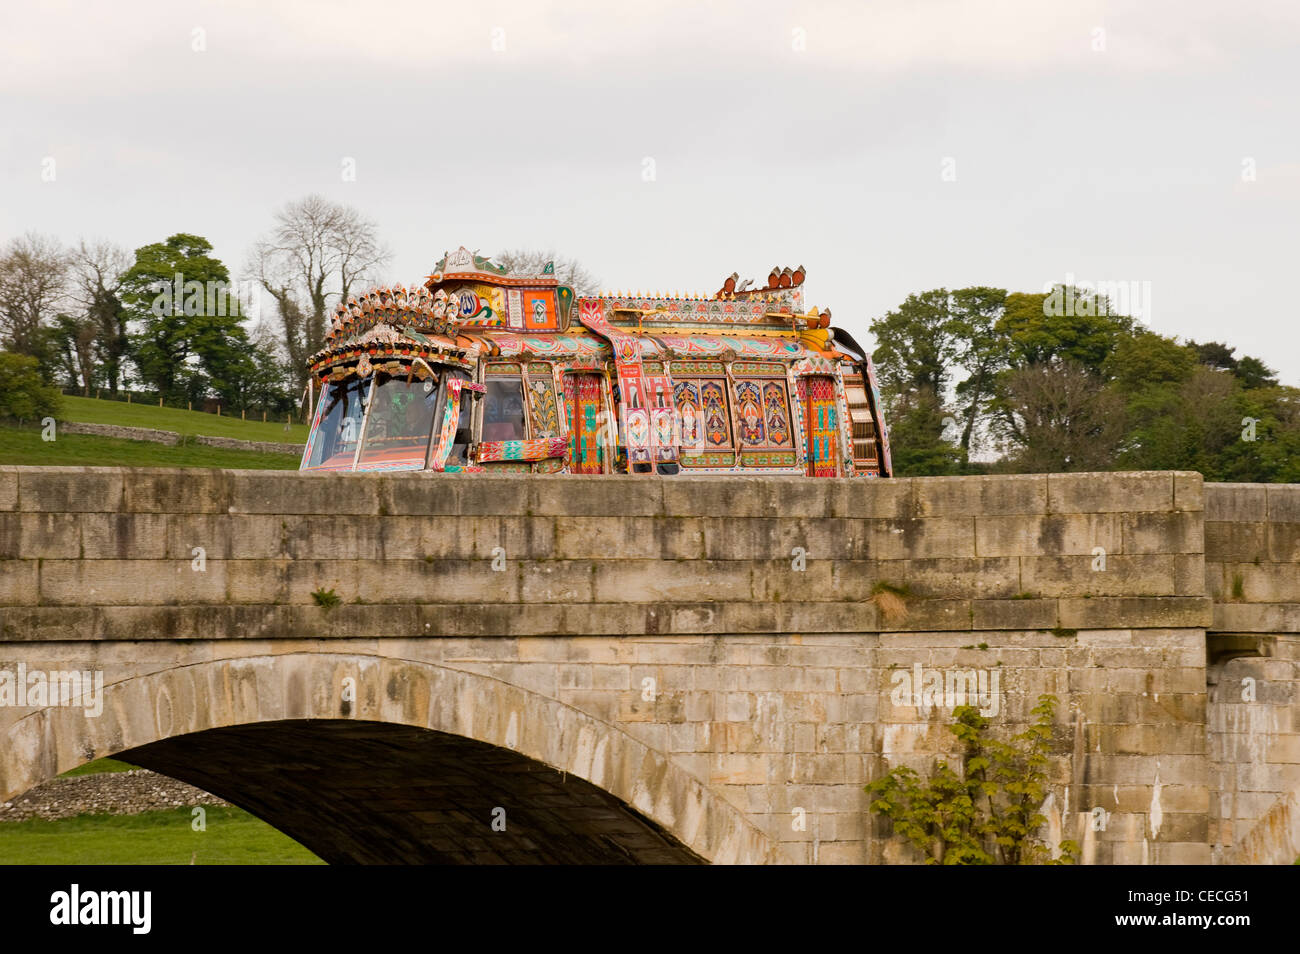 Colourful decorated Indian style bus driving over old bridge in Yorkshire Dales (on location, filming Sharwood's ad campaign) - Burnsall, England, UK. Stock Photo